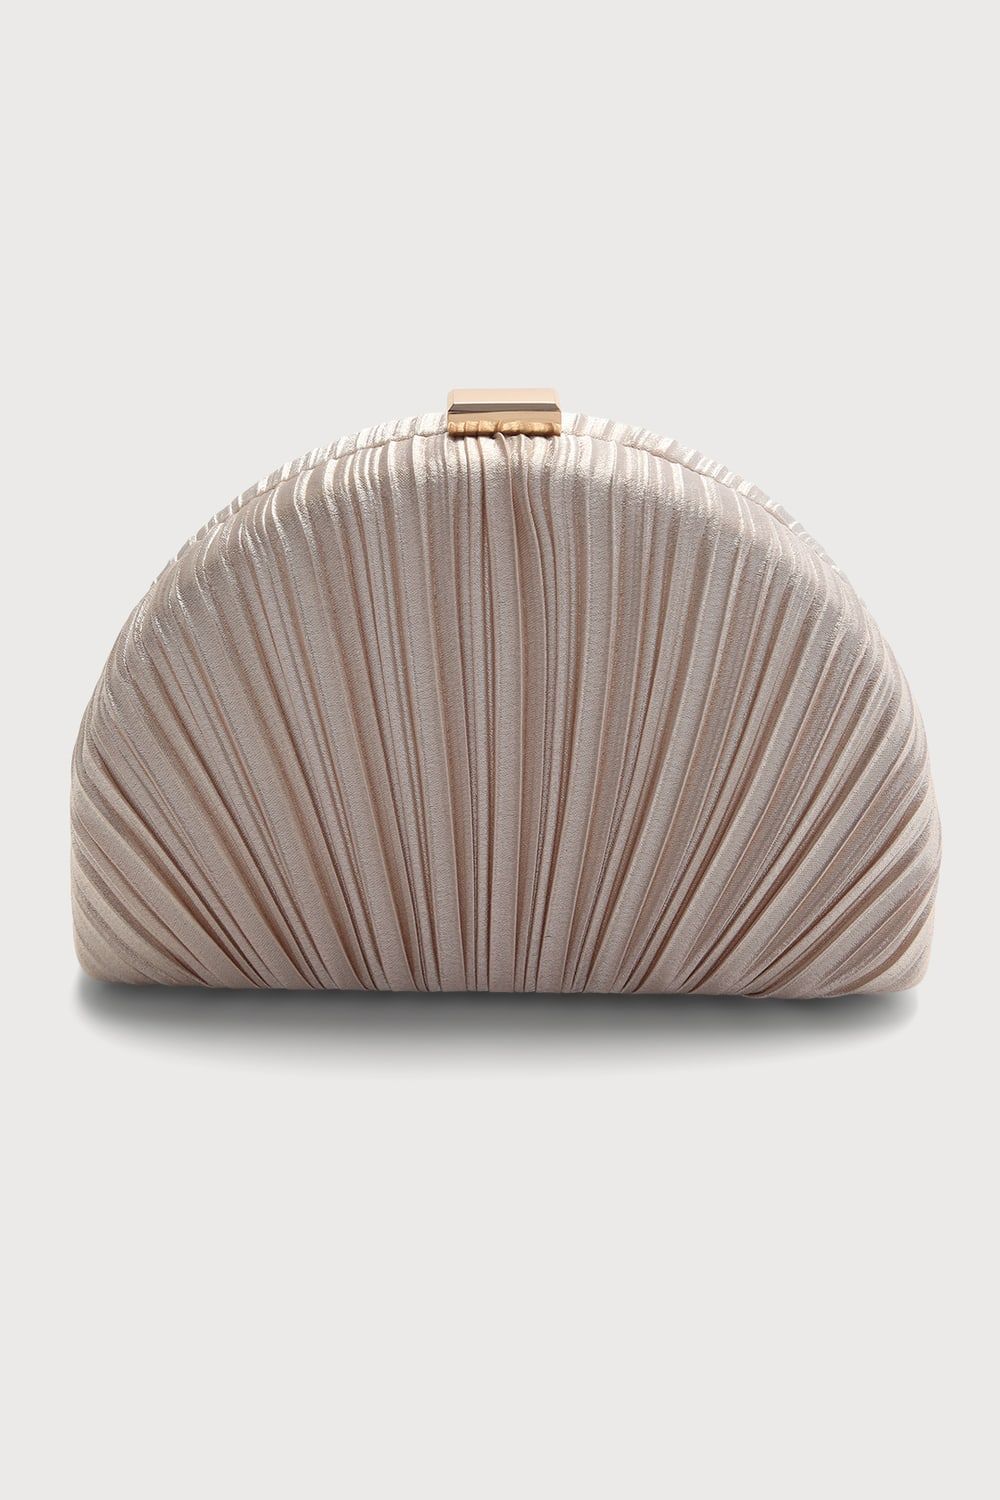 Pleat Perfection Champagne Pleated Hard Clutch | Lulus